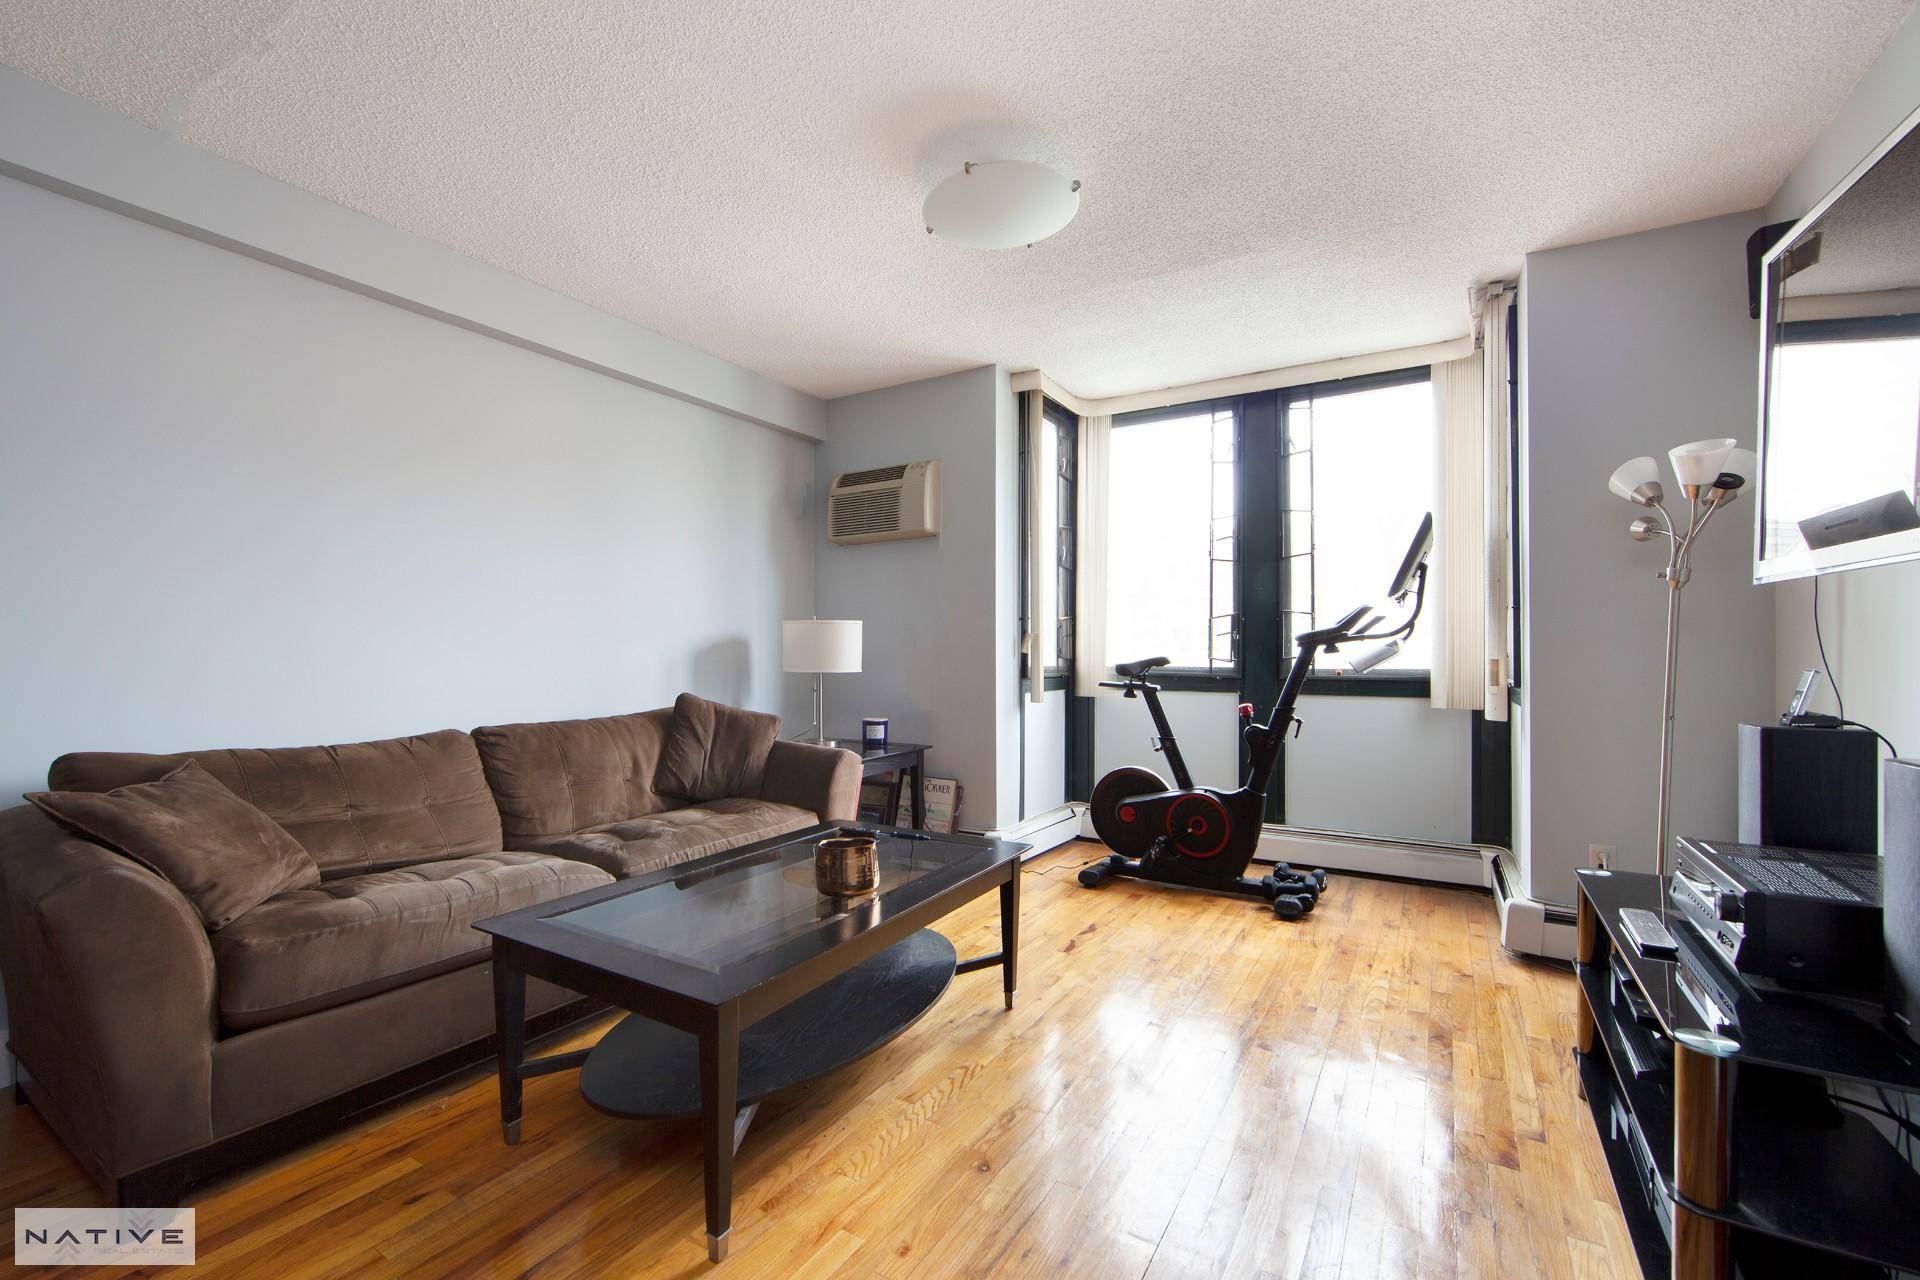 Native Real Estate is pleased to present 1 bedroom, 1 bath Condo located in one of the best areas of Bay Ridge, with all the perks you could imagine !